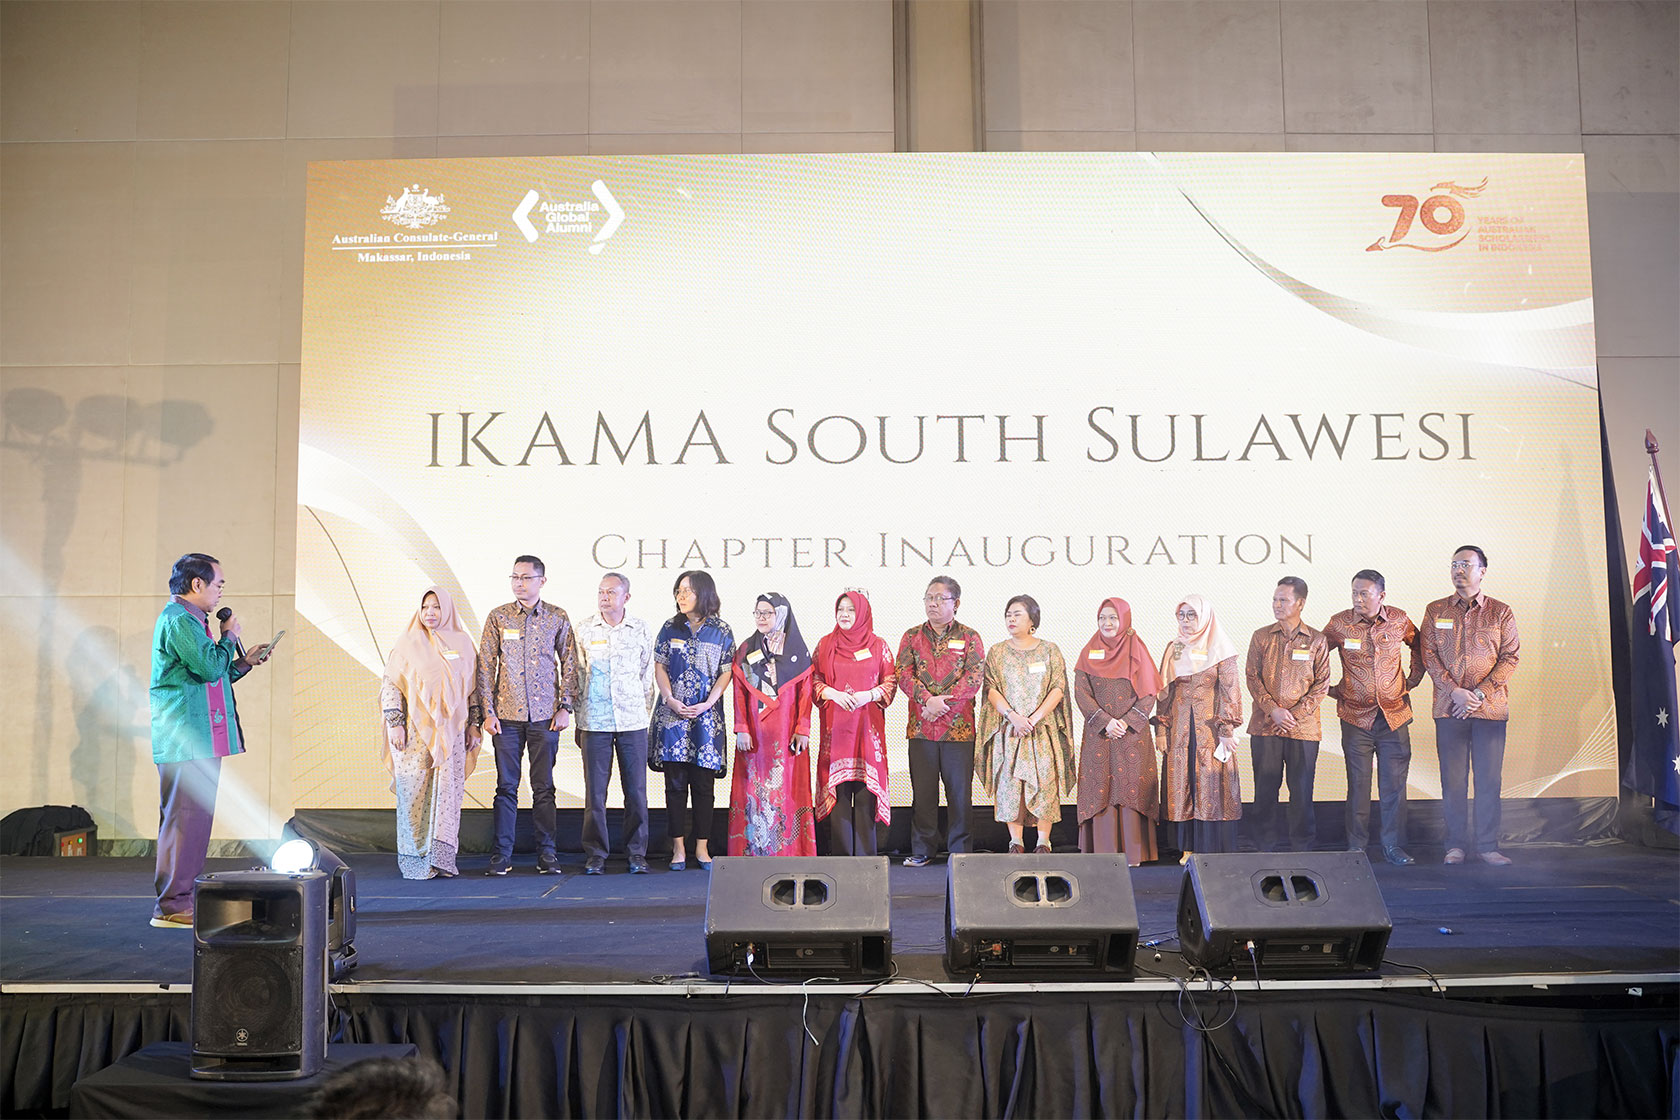 IKAMA South Sulawesi Inauguration: A Momentous Occasion Commemorated during the Gala Dinner in Makassar